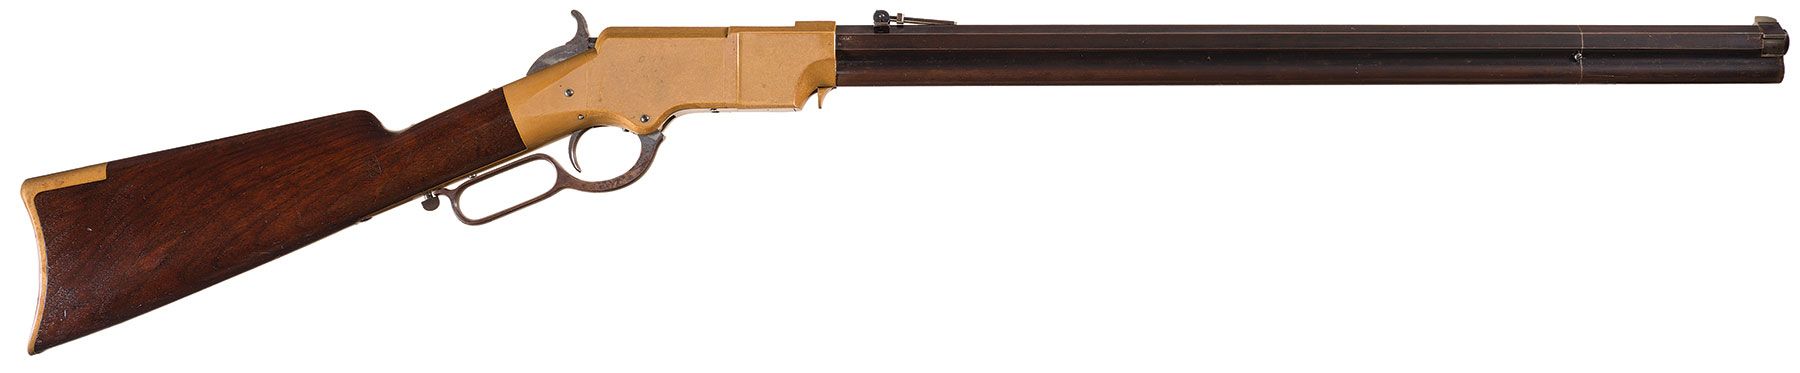 Finest Known Martial Henry Rifle